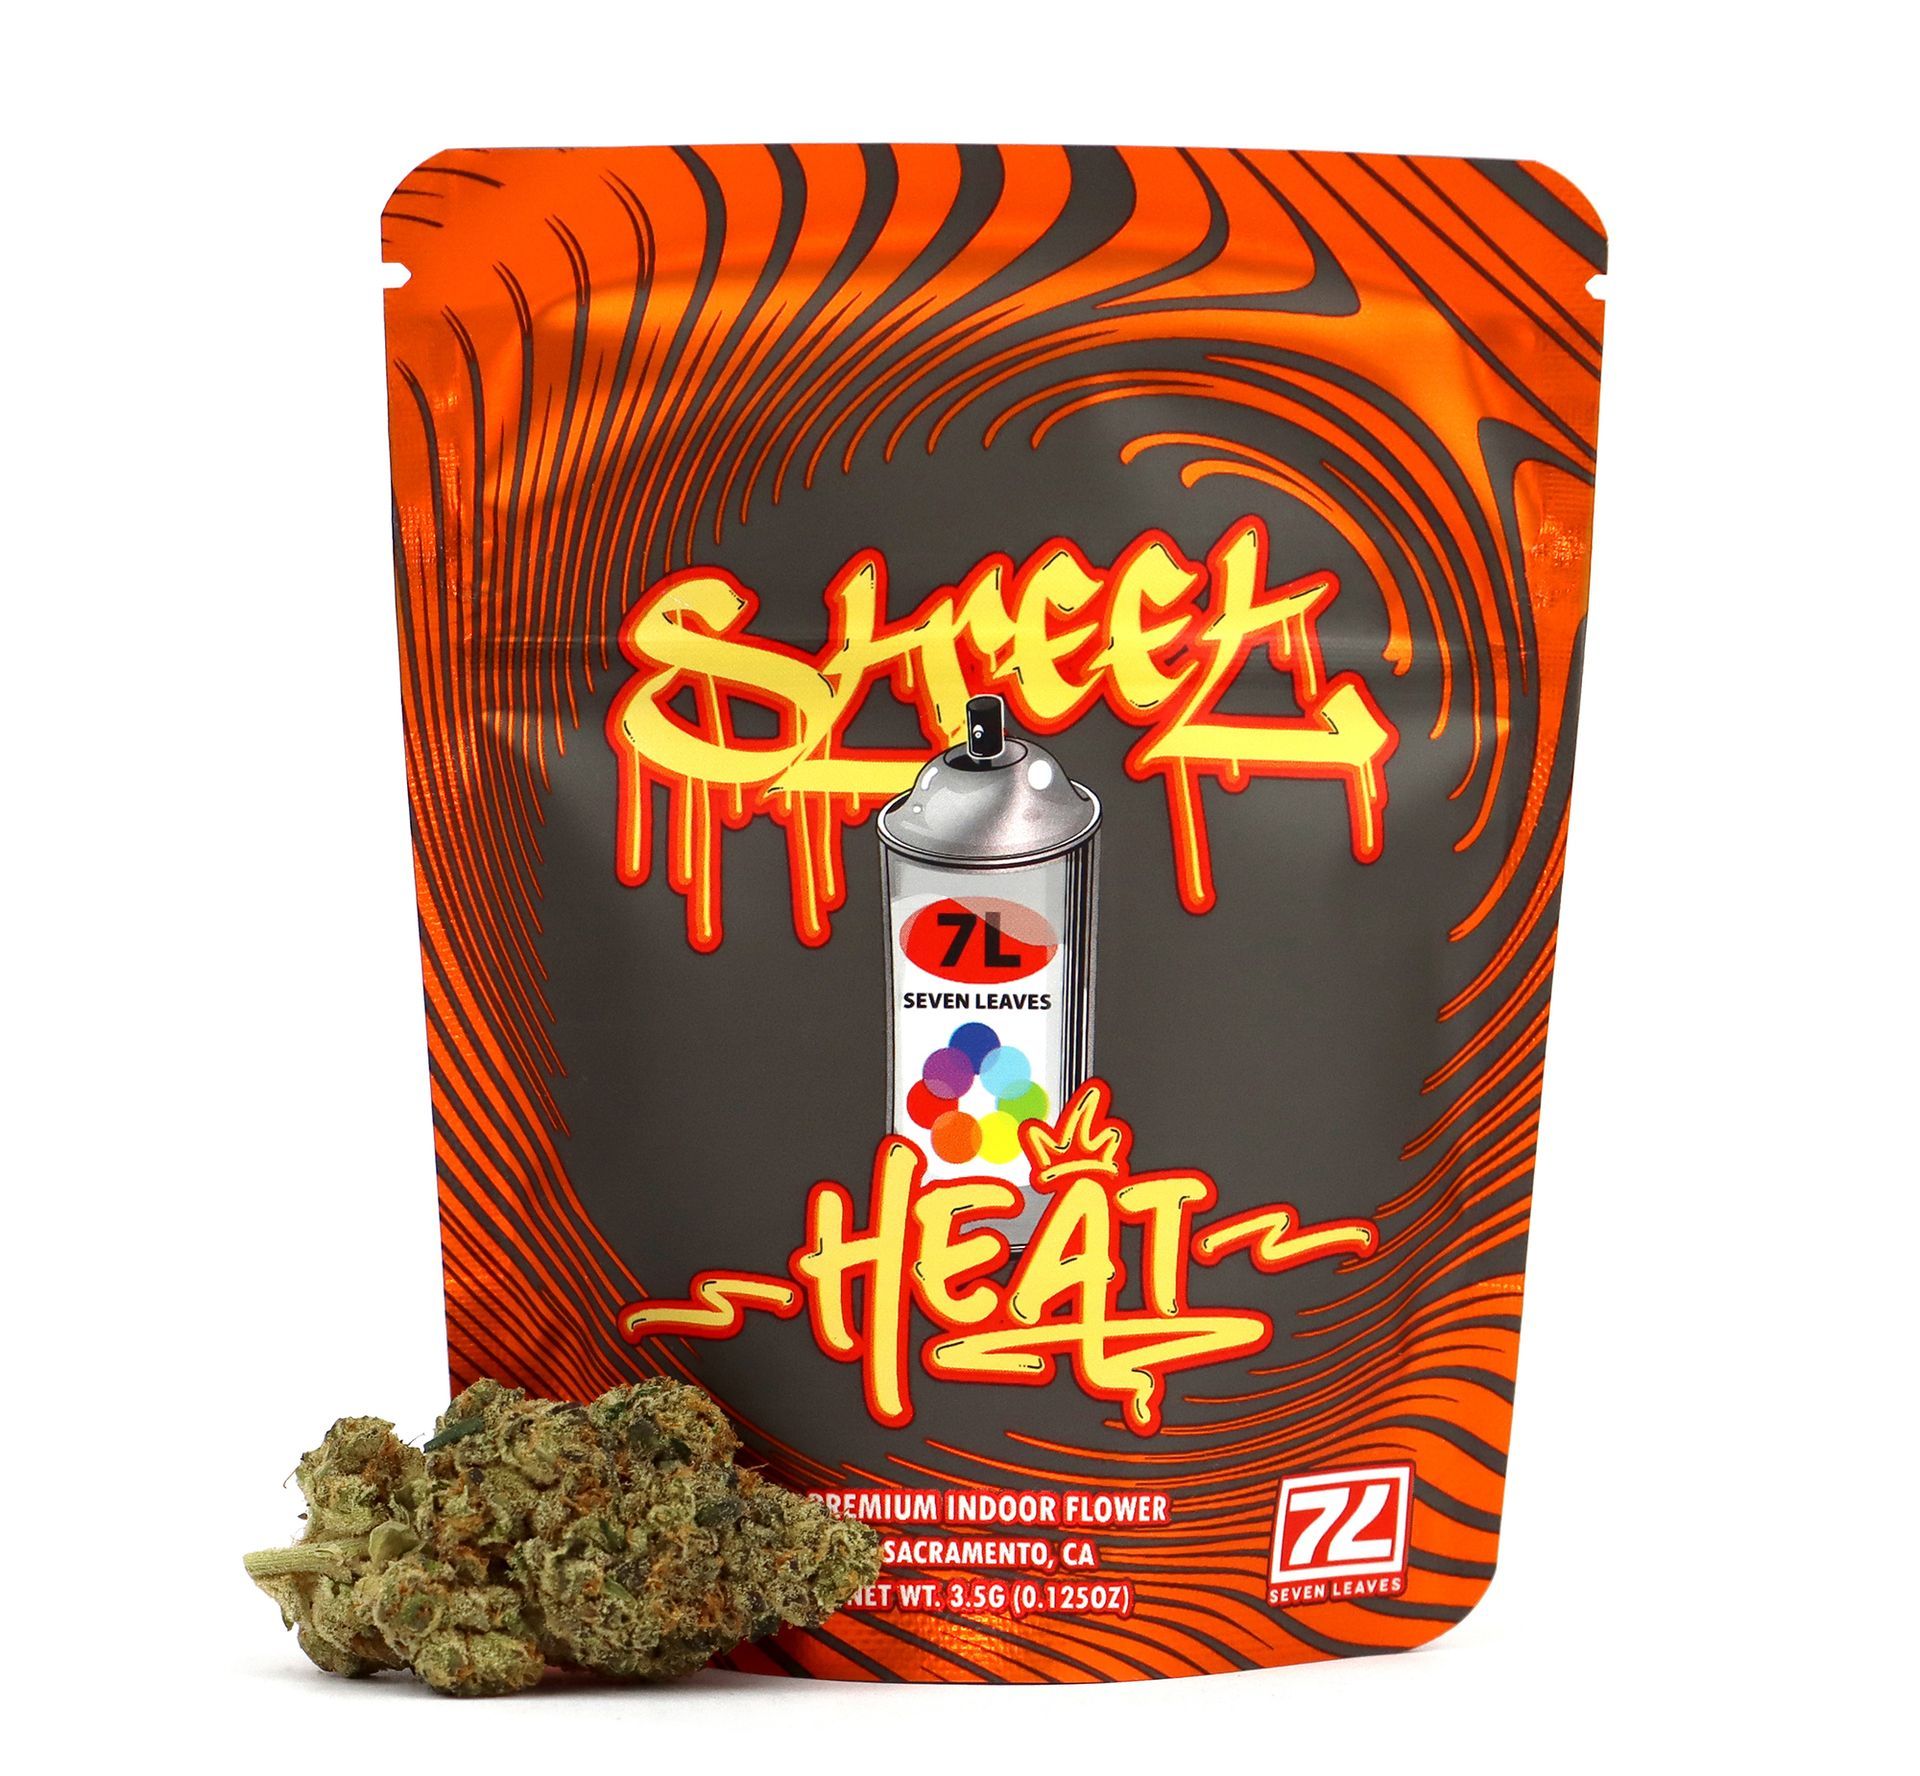 packaging spread of street heat with weed next to it